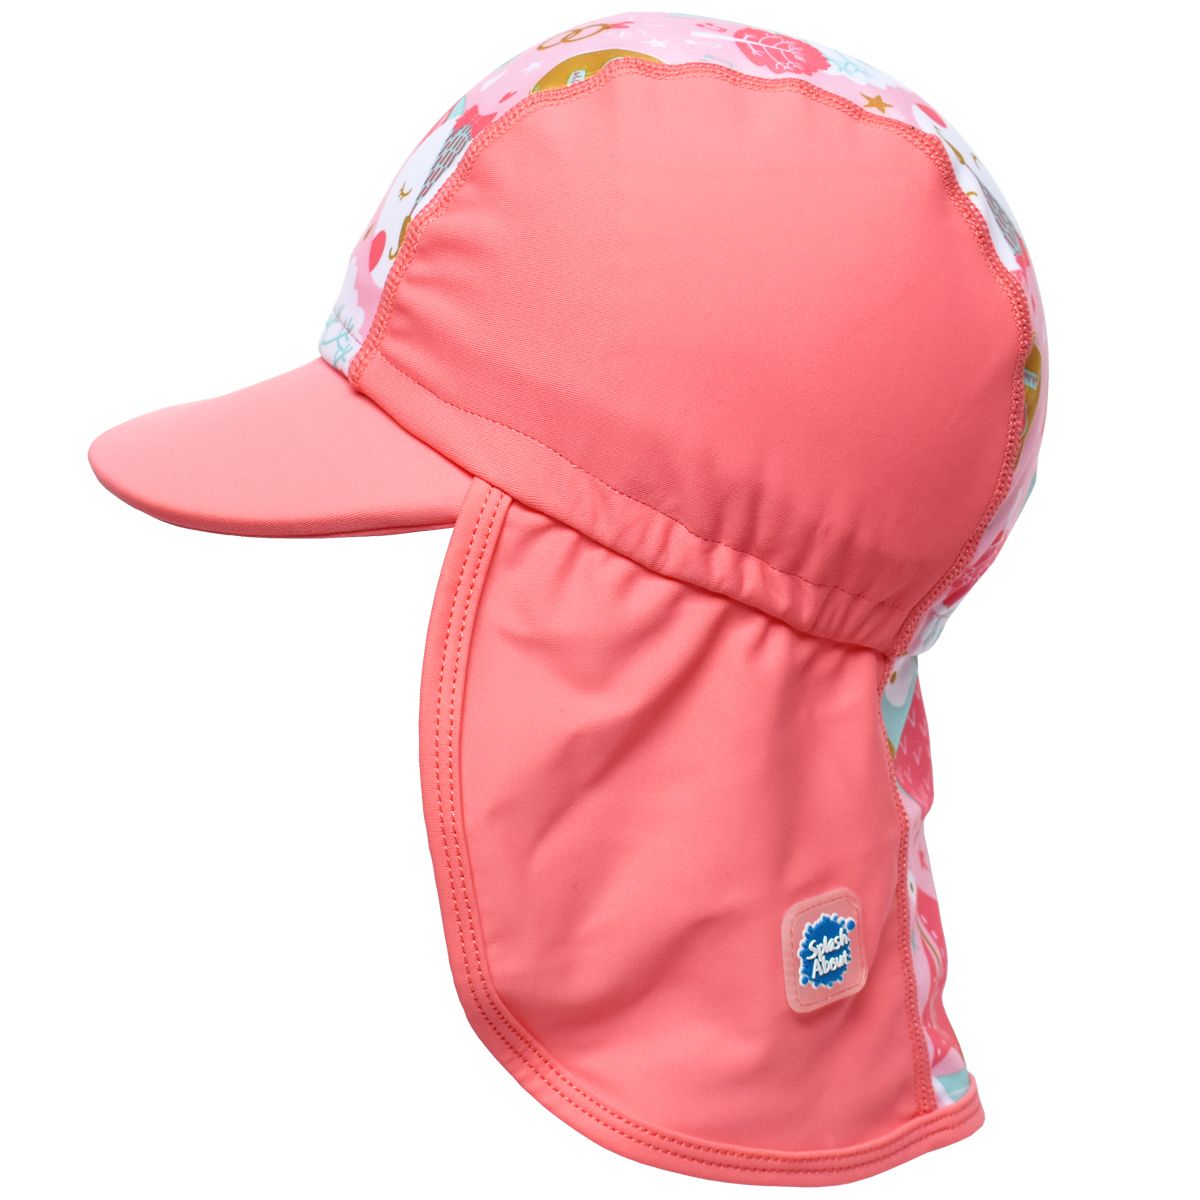 Legionnaire style sun hat in reddish pink and baby pink, with the owl and the pussycat themed print panel. Side.